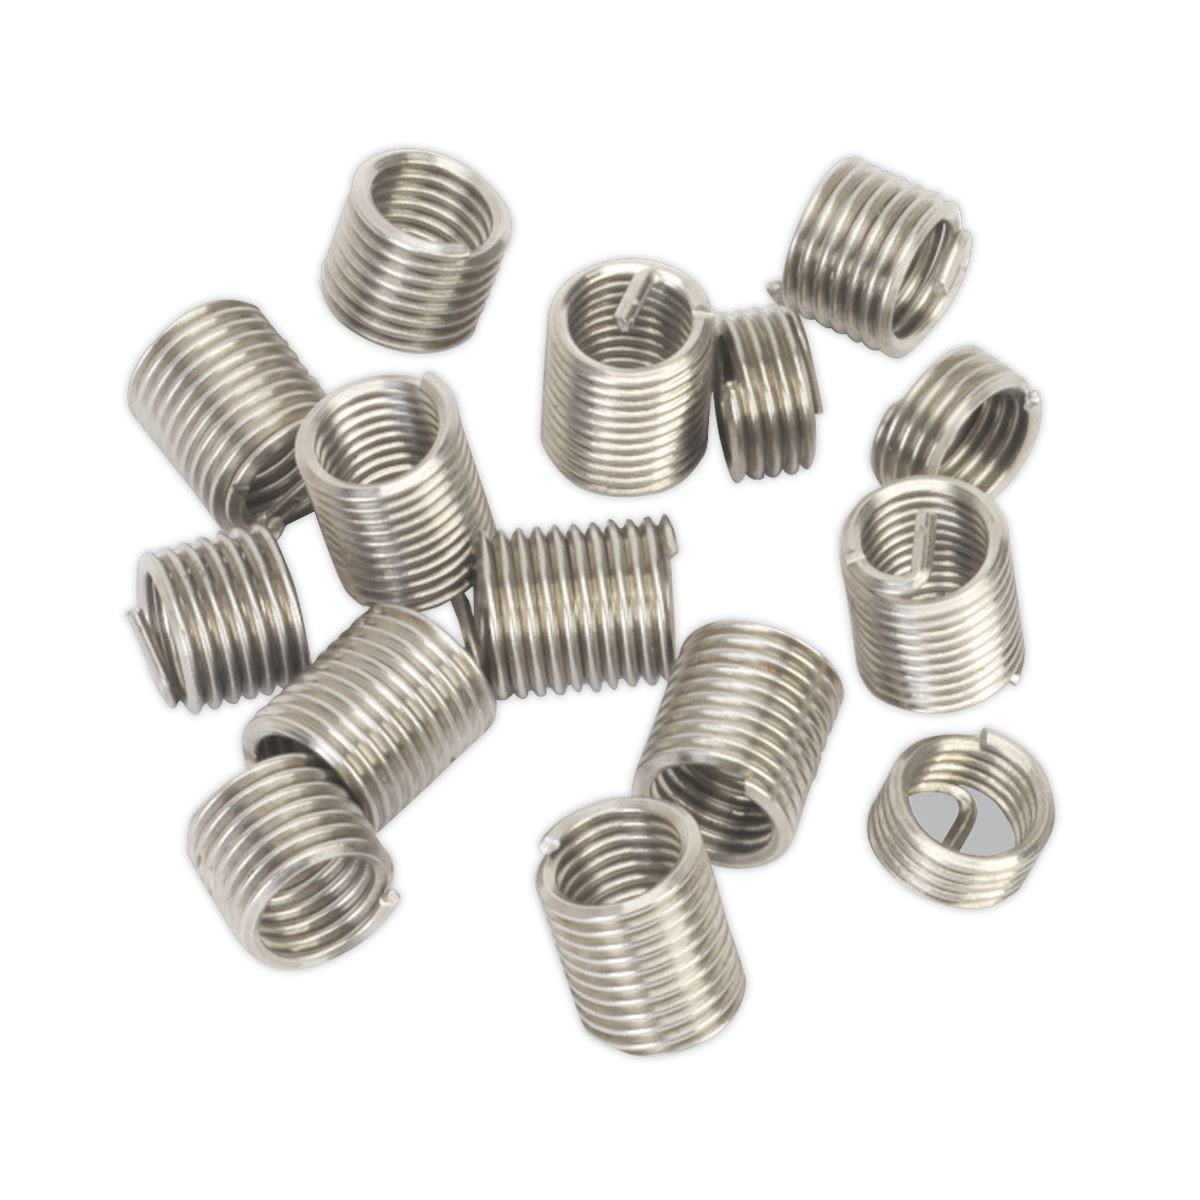 Sealey Thread Insert M14 x 1.25mm for TRM14 Threaded Inserts Helicoil 5 Pack